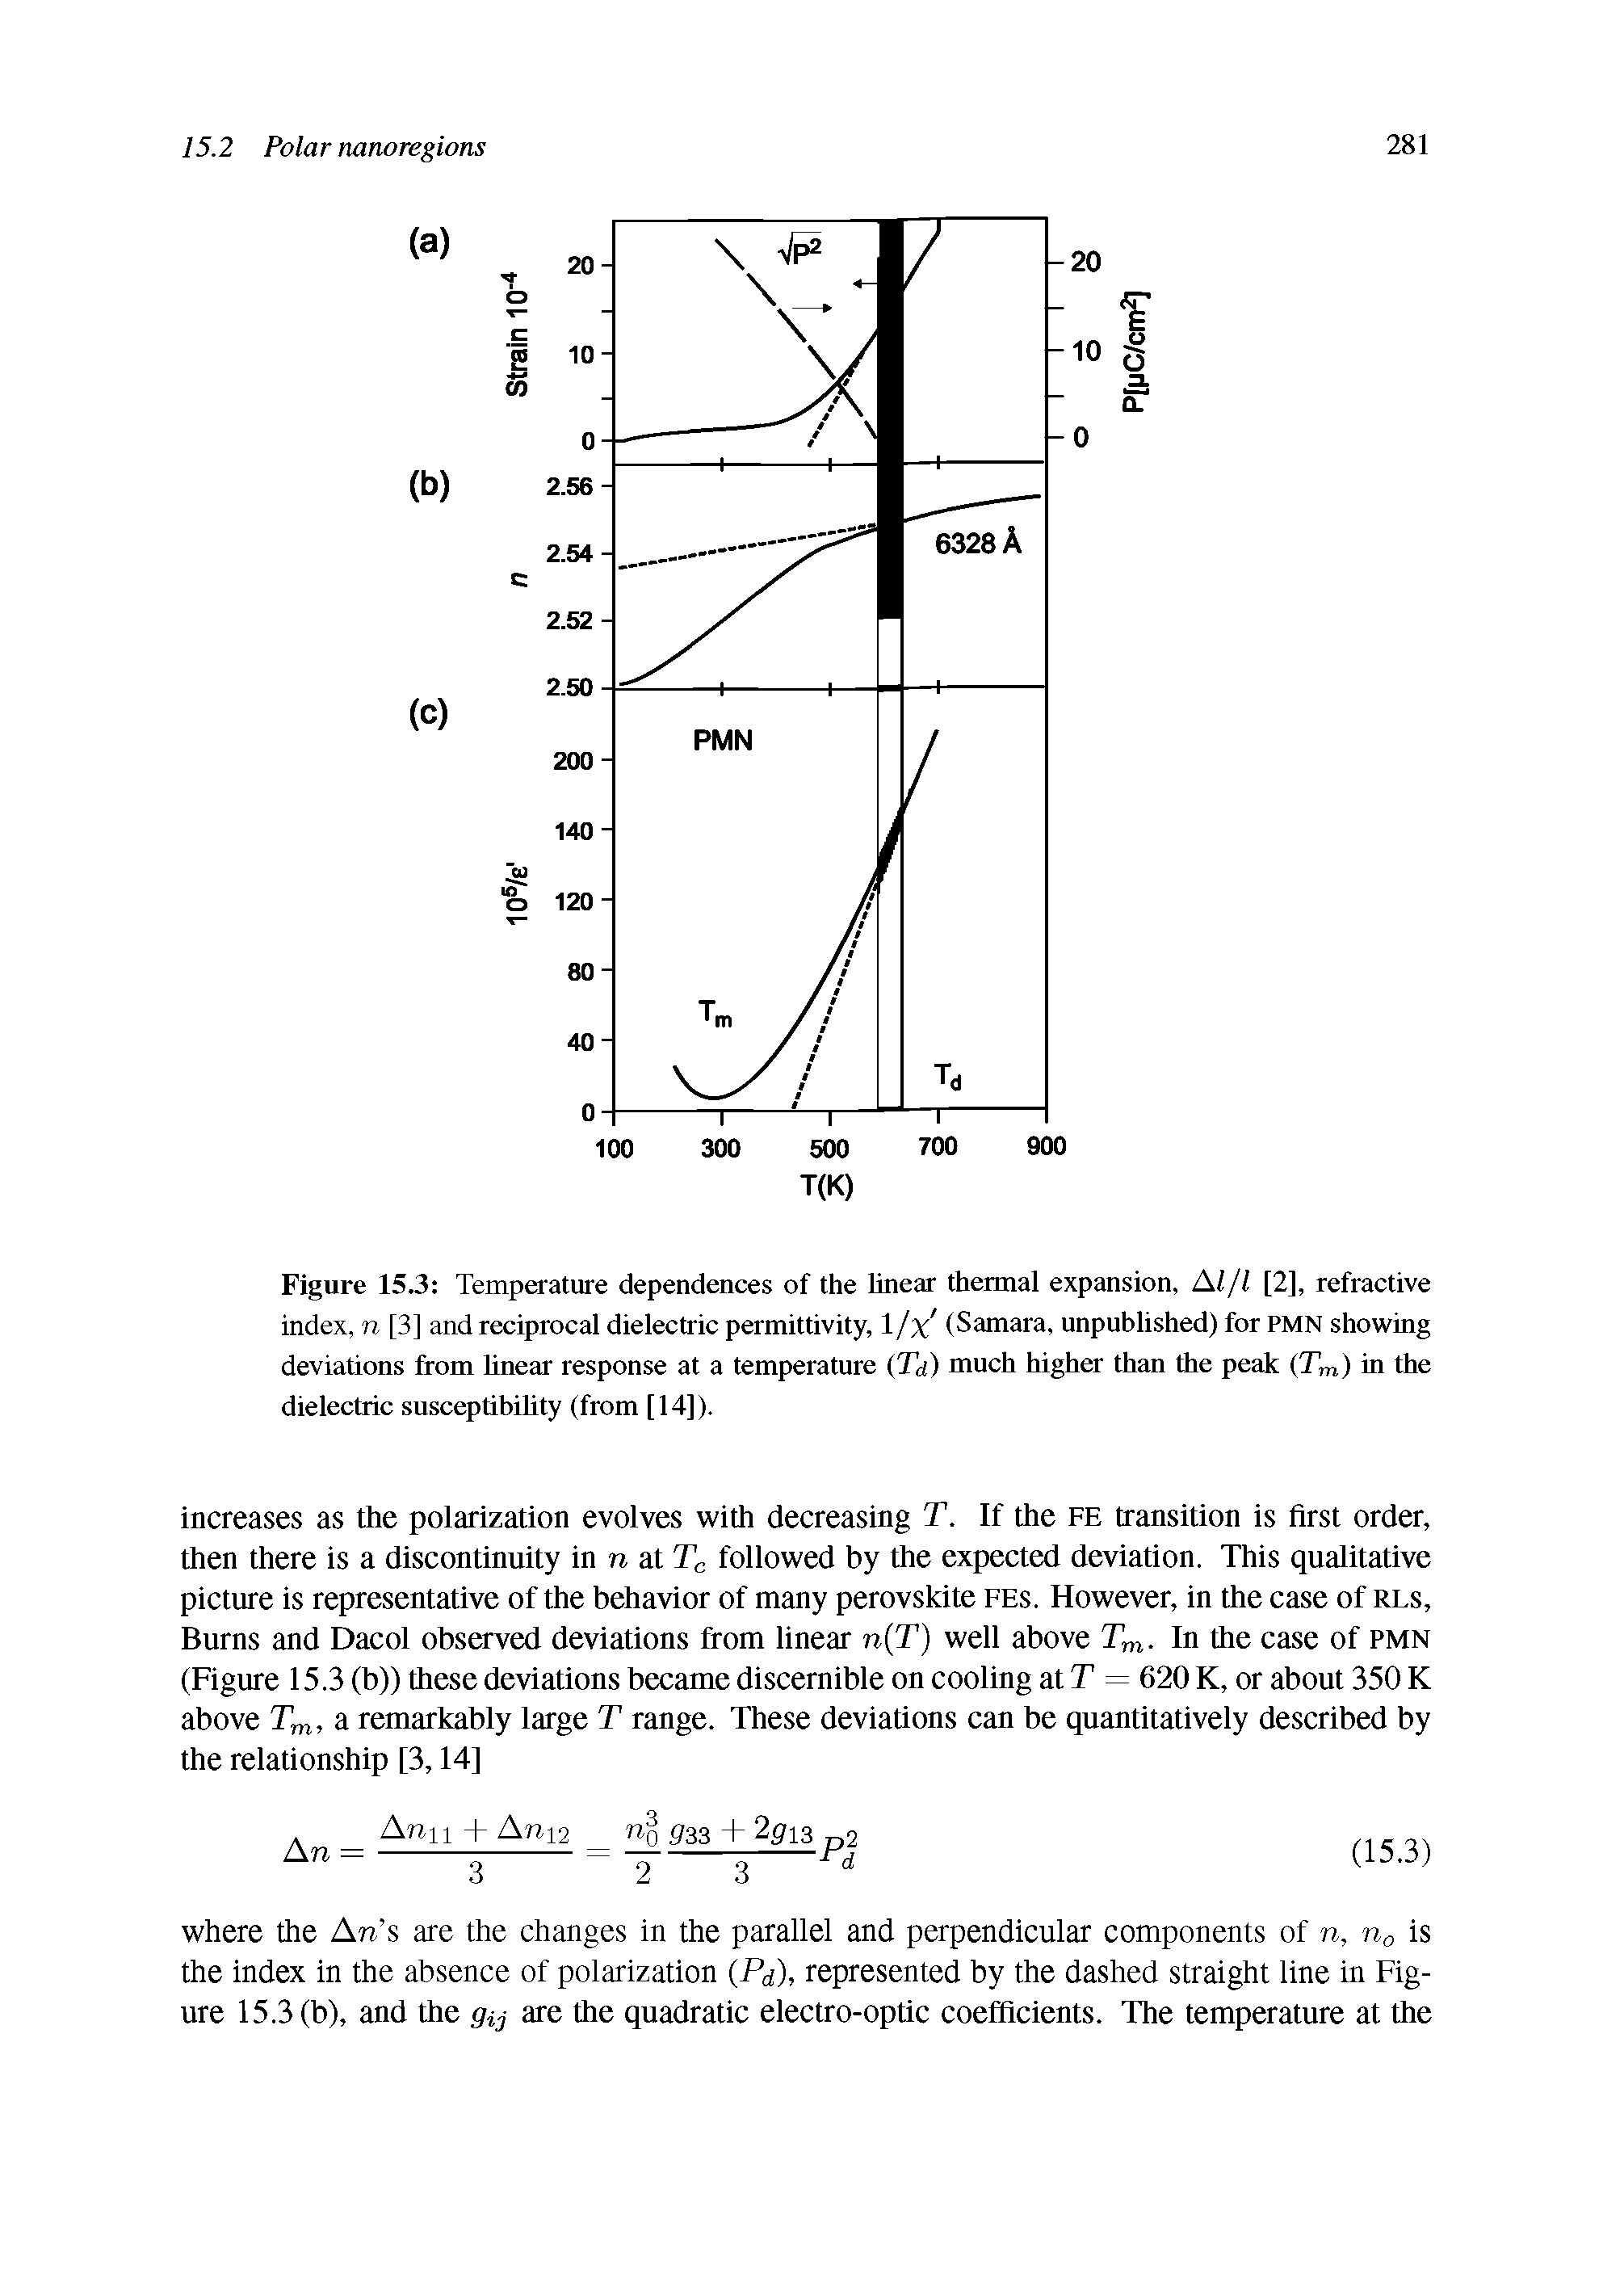 Figure 15.3 Temperature dependences of the linear thermal expansion, Al/l [2], refractive index, n [3] and reciprocal dielectric permittivity, 1 /x (Samara, unpublished) for pmn showing deviations from linear response at a temperature (I d) much higher than the peak (Tm) in the dielectric susceptibility (from [14]).